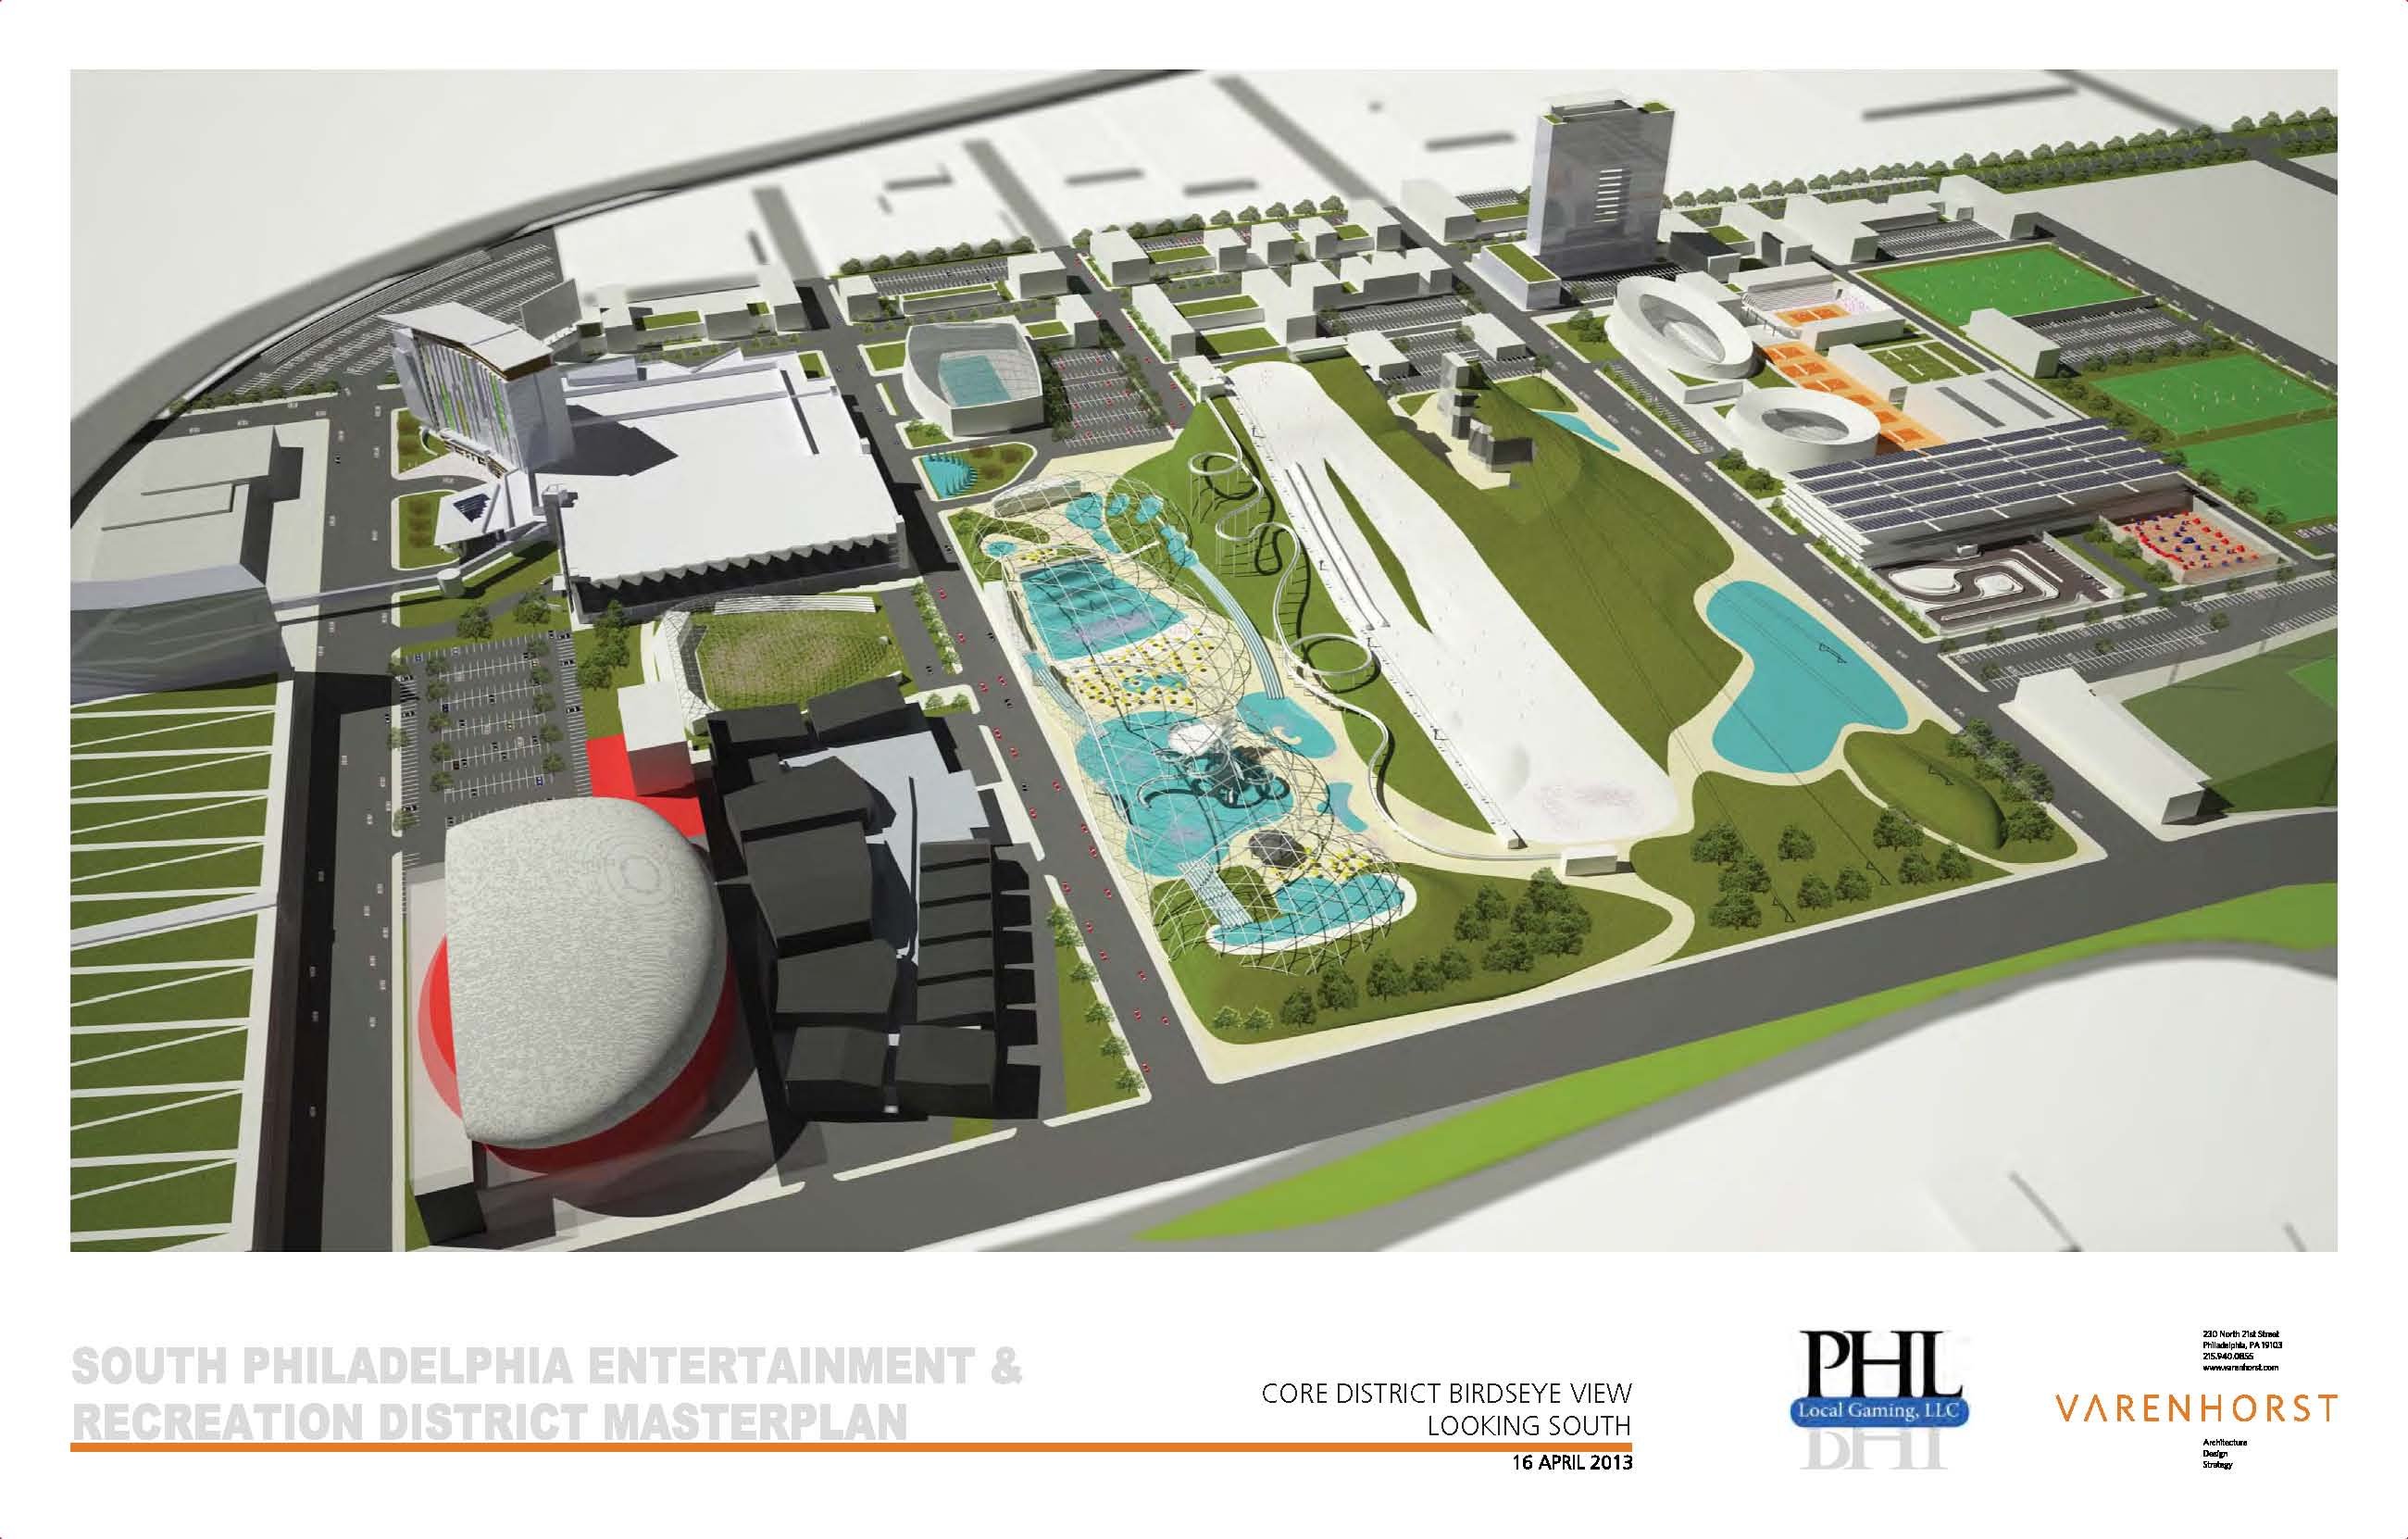 PHL Local Gaming's proposed entertainment and recreation district